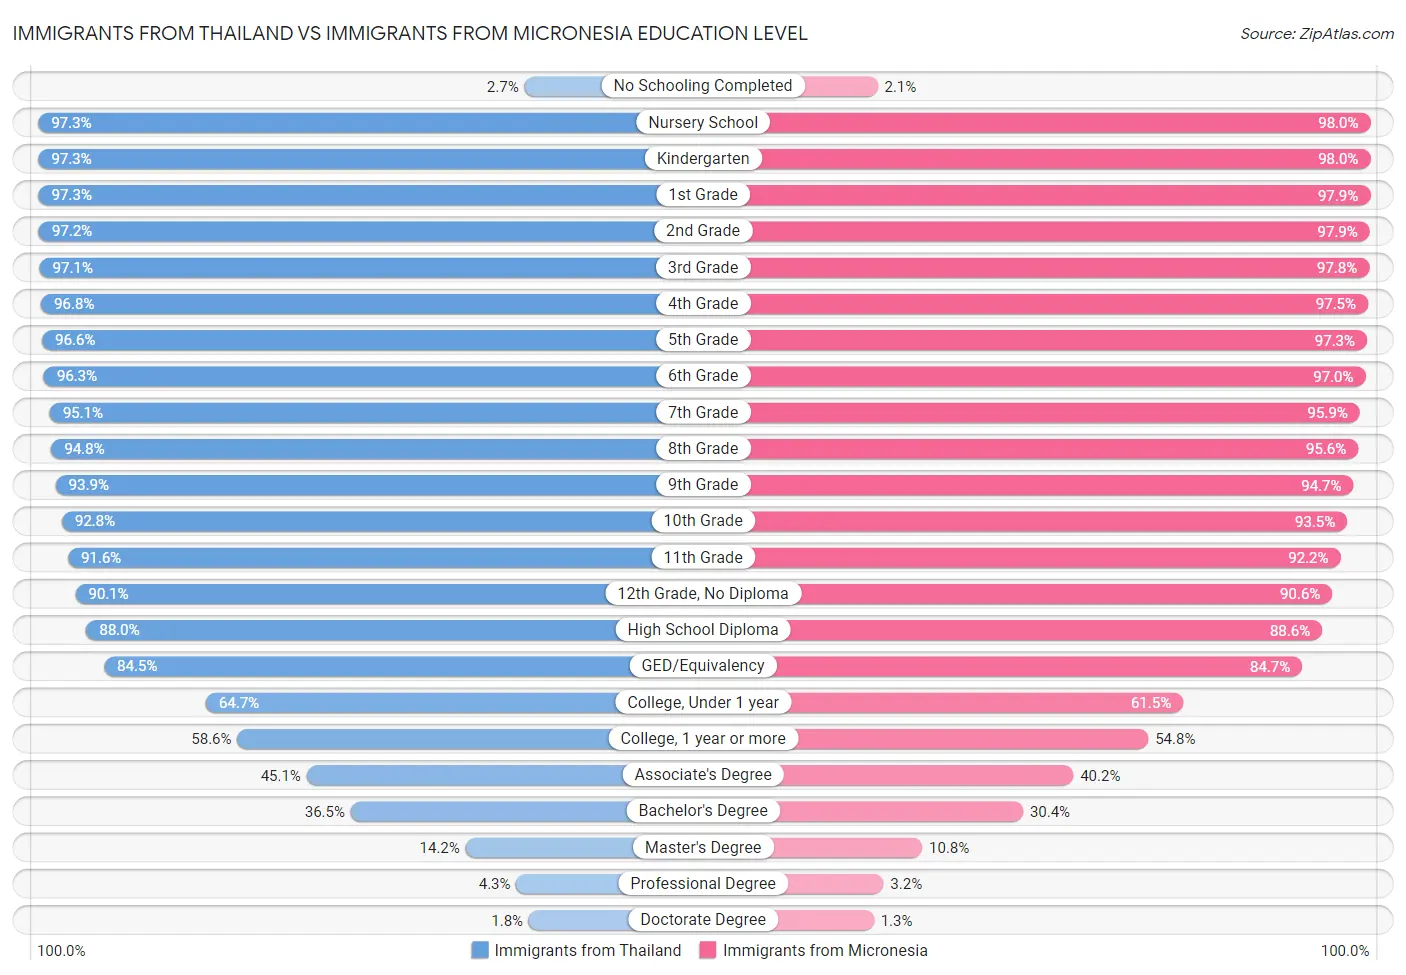 Immigrants from Thailand vs Immigrants from Micronesia Education Level